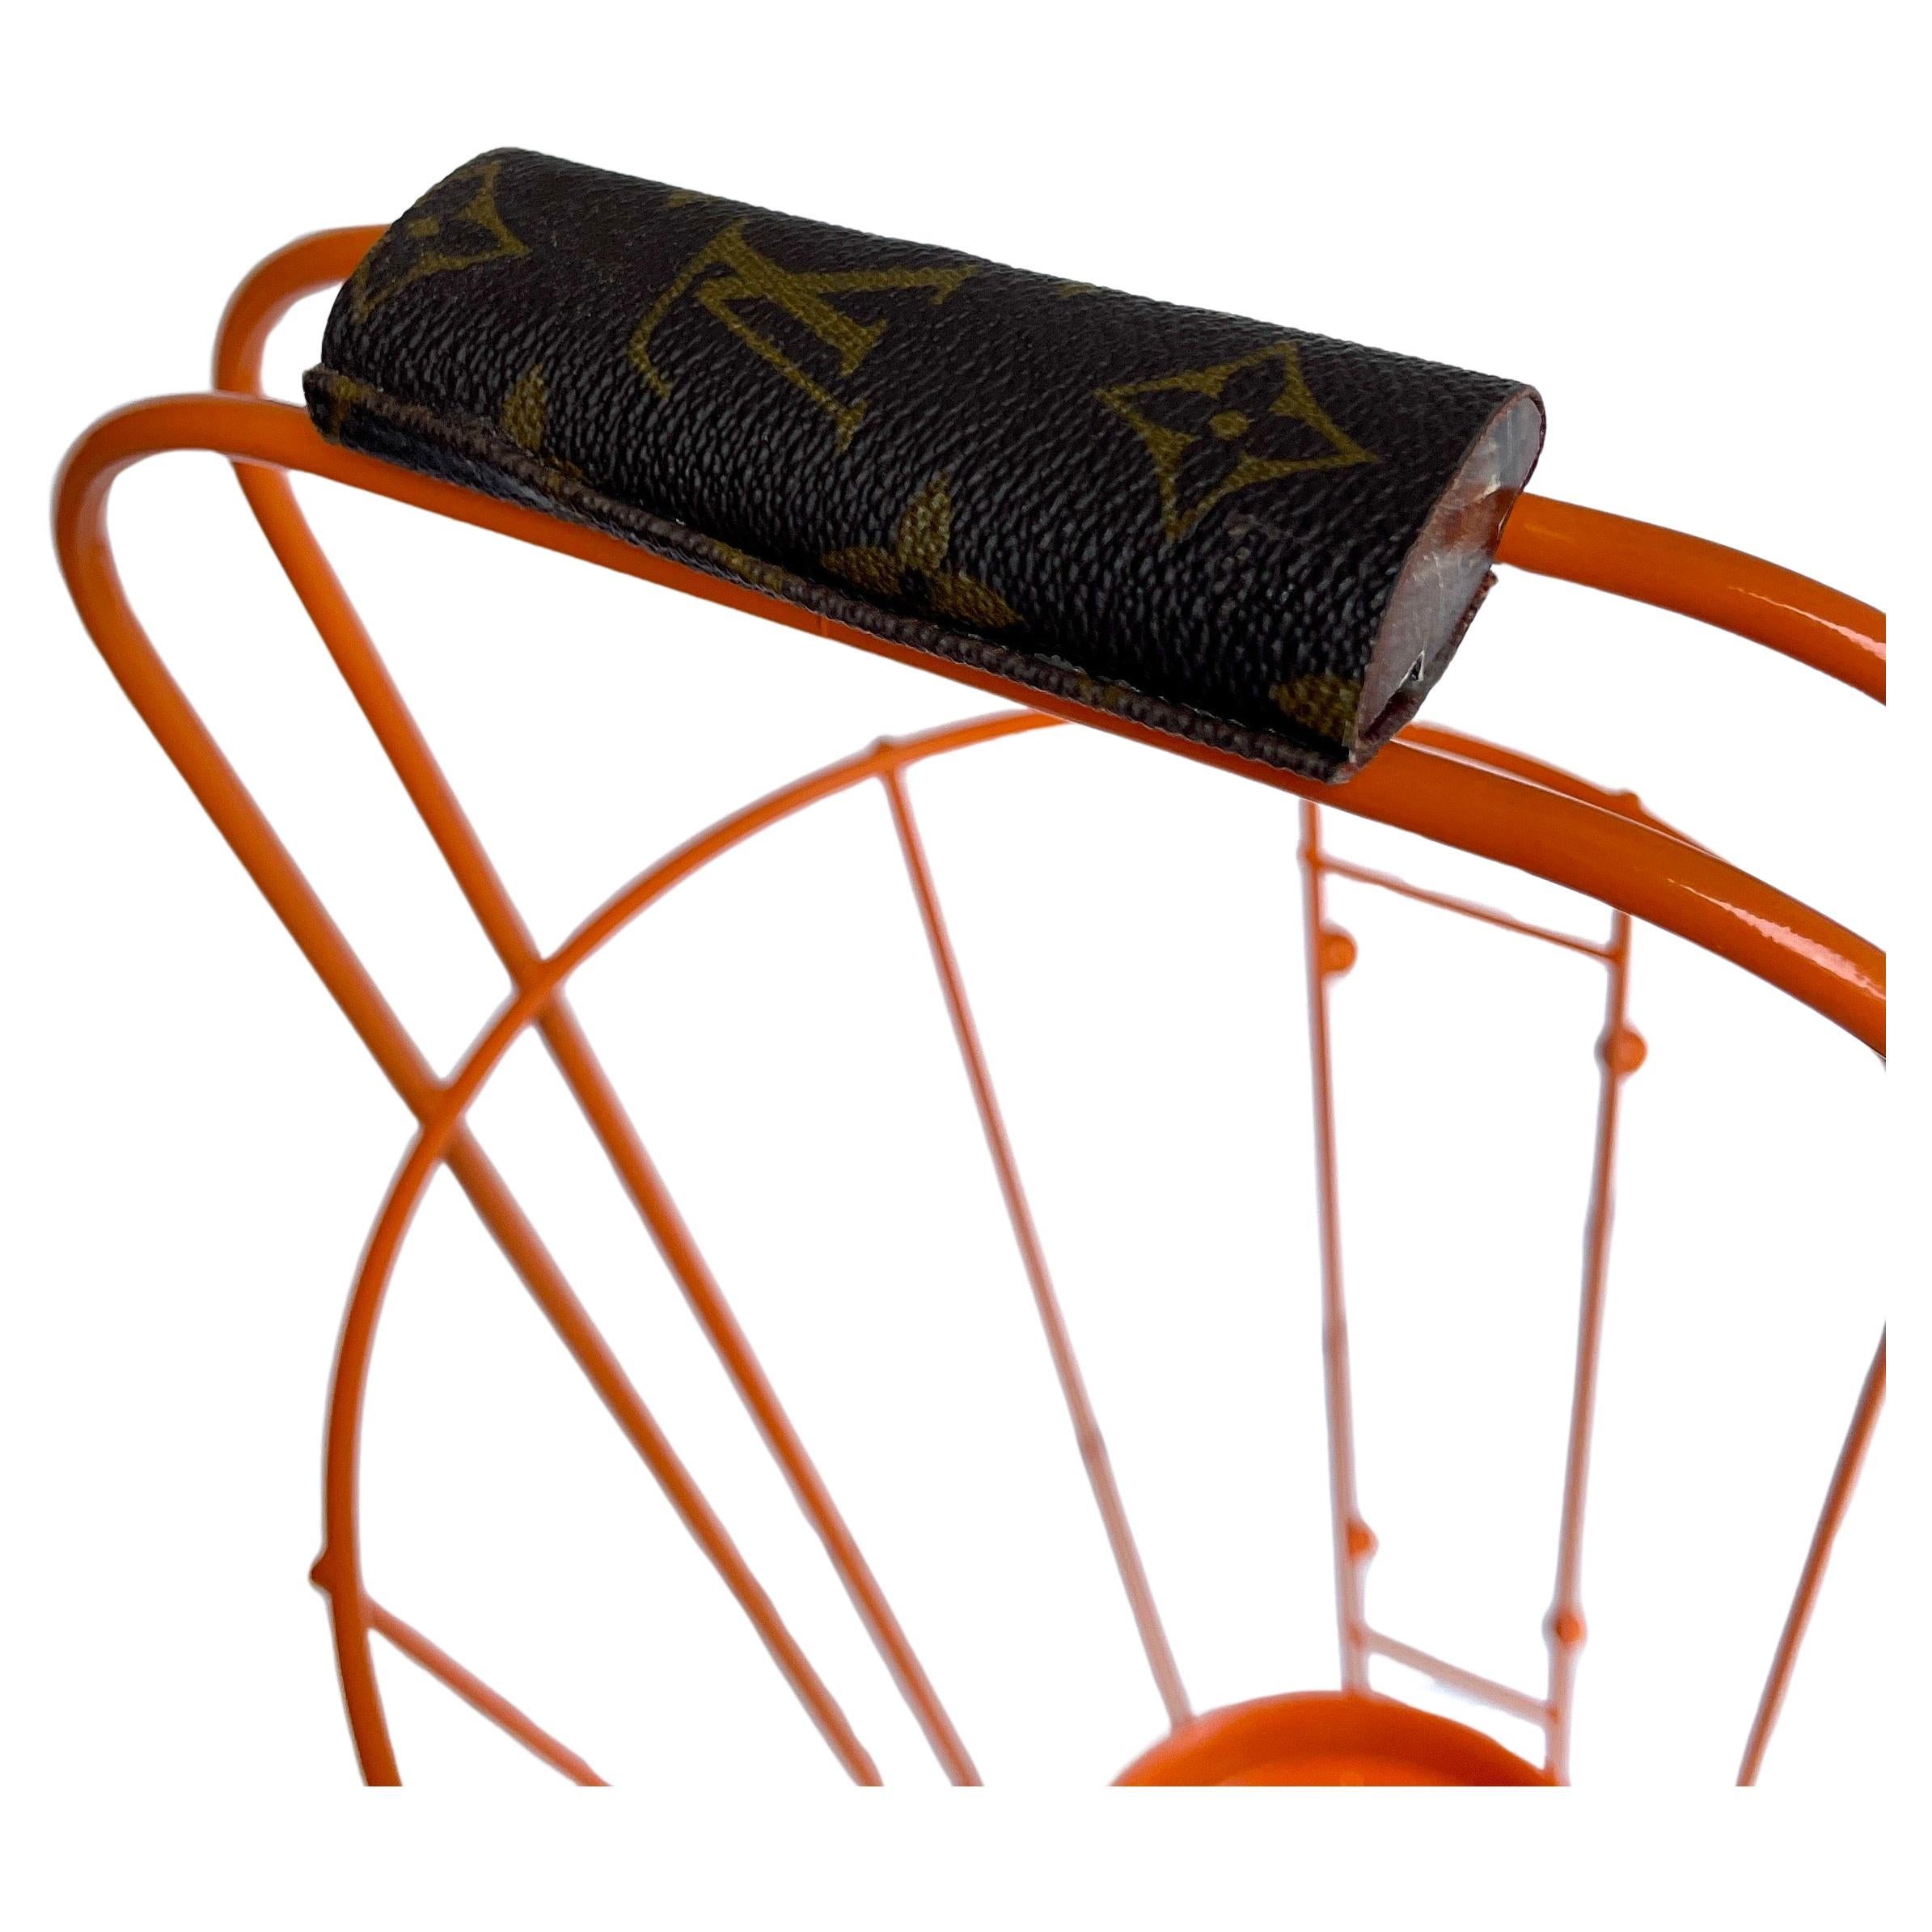 Mid-Century Modern Powder-Coated in Orange Umbrella Stand Holder

This umbrella stand is newly powder-coated in what we call Hermes Orange color. There is great detail on this metal lightweight piece with custom Louis Vuitton Monogram leather